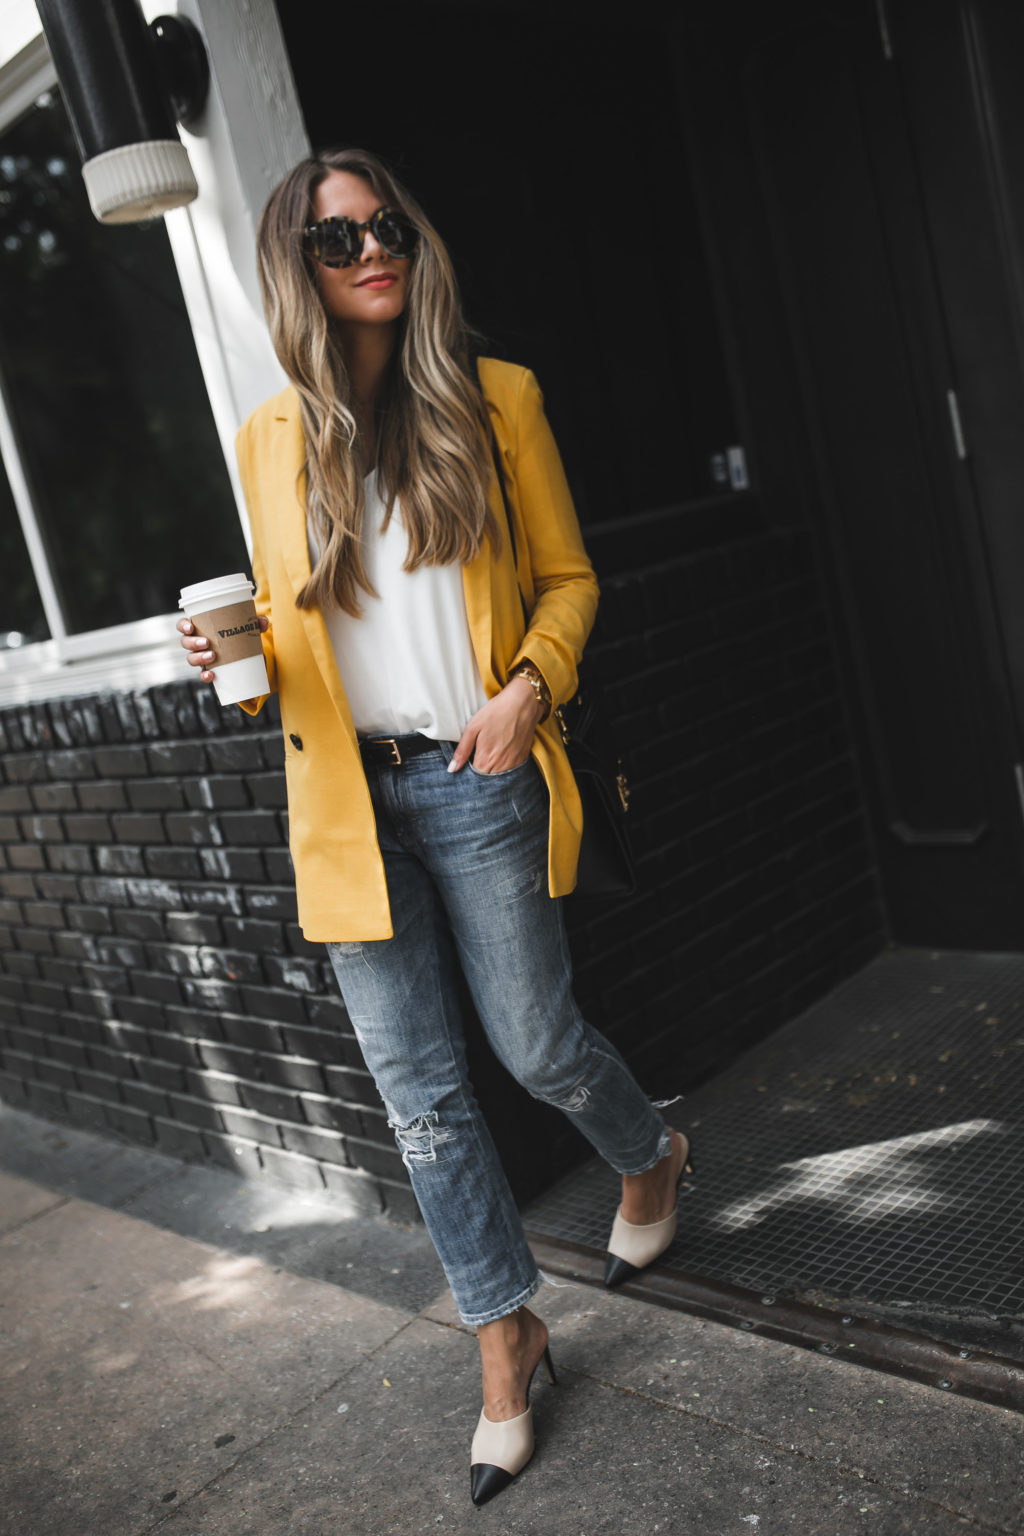 two-toned pumps and yellow blazer